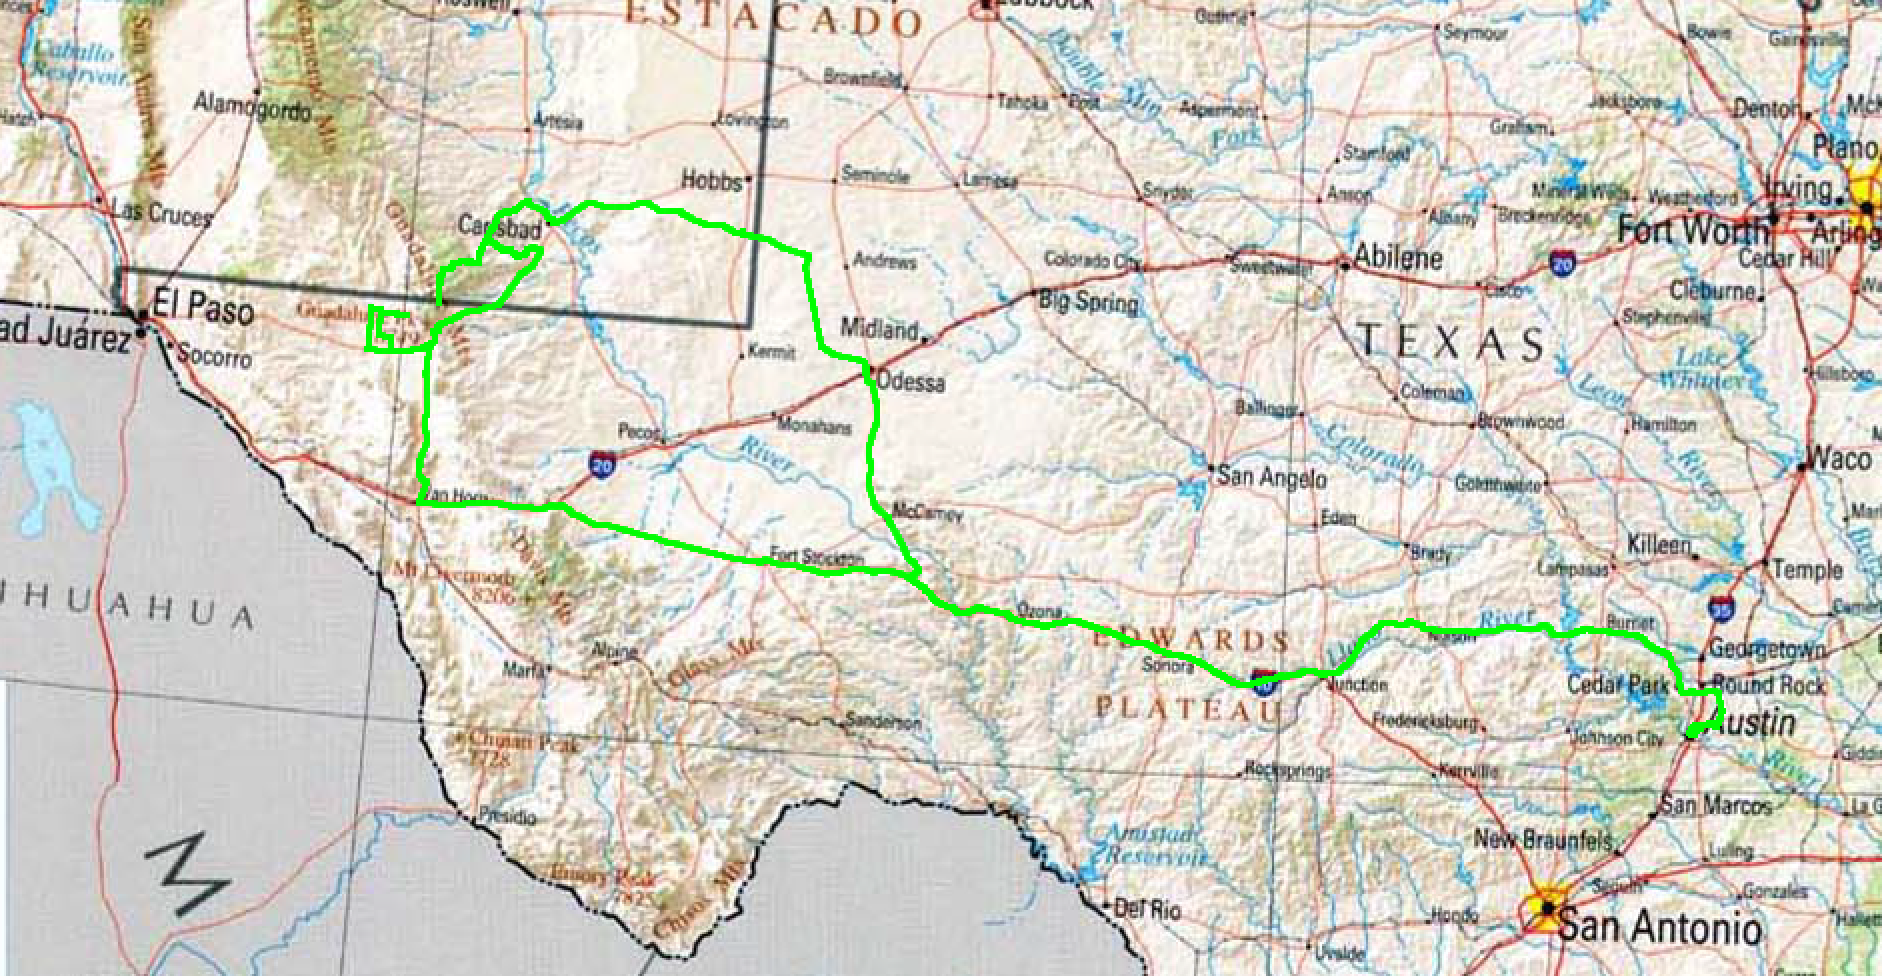 Map of West Texas and southern New Mexico with route driven highlighted in green.